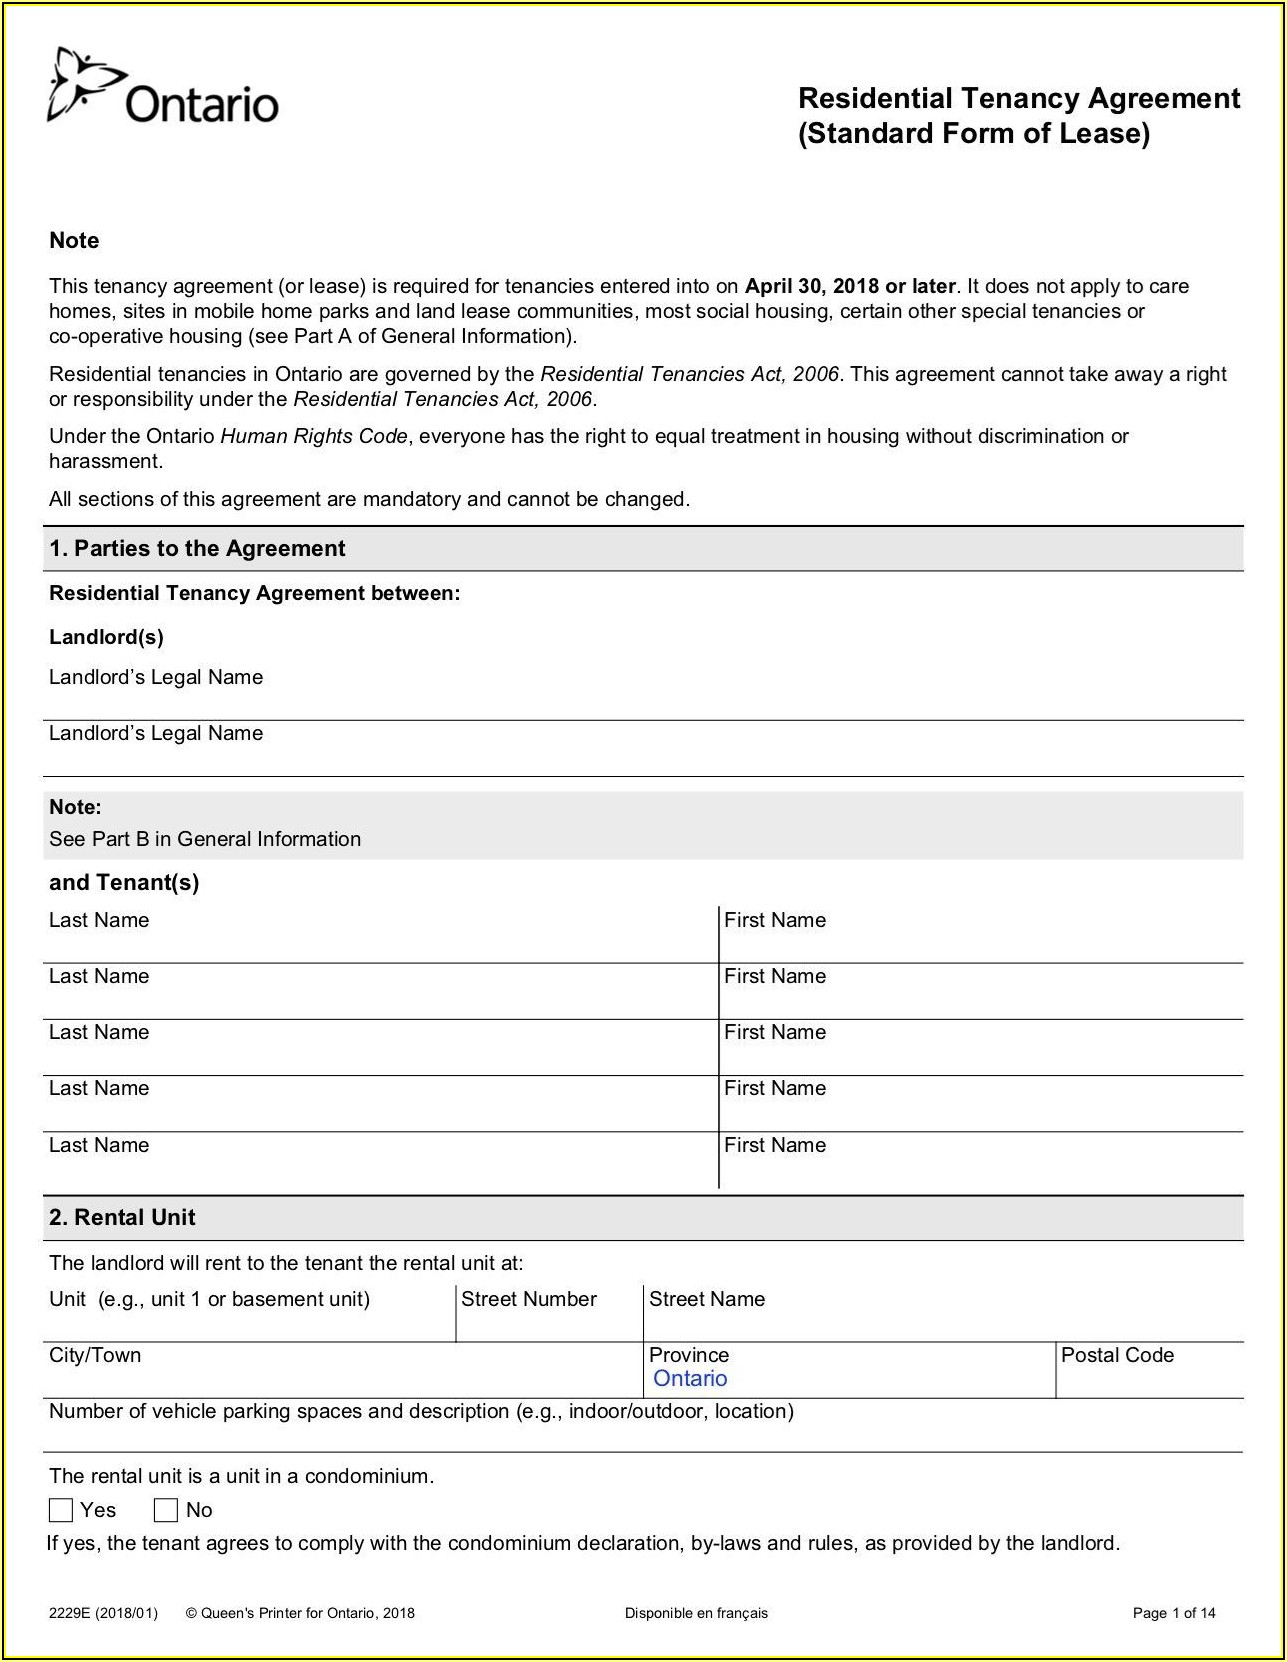 Rental Lease Agreement Form Ontario